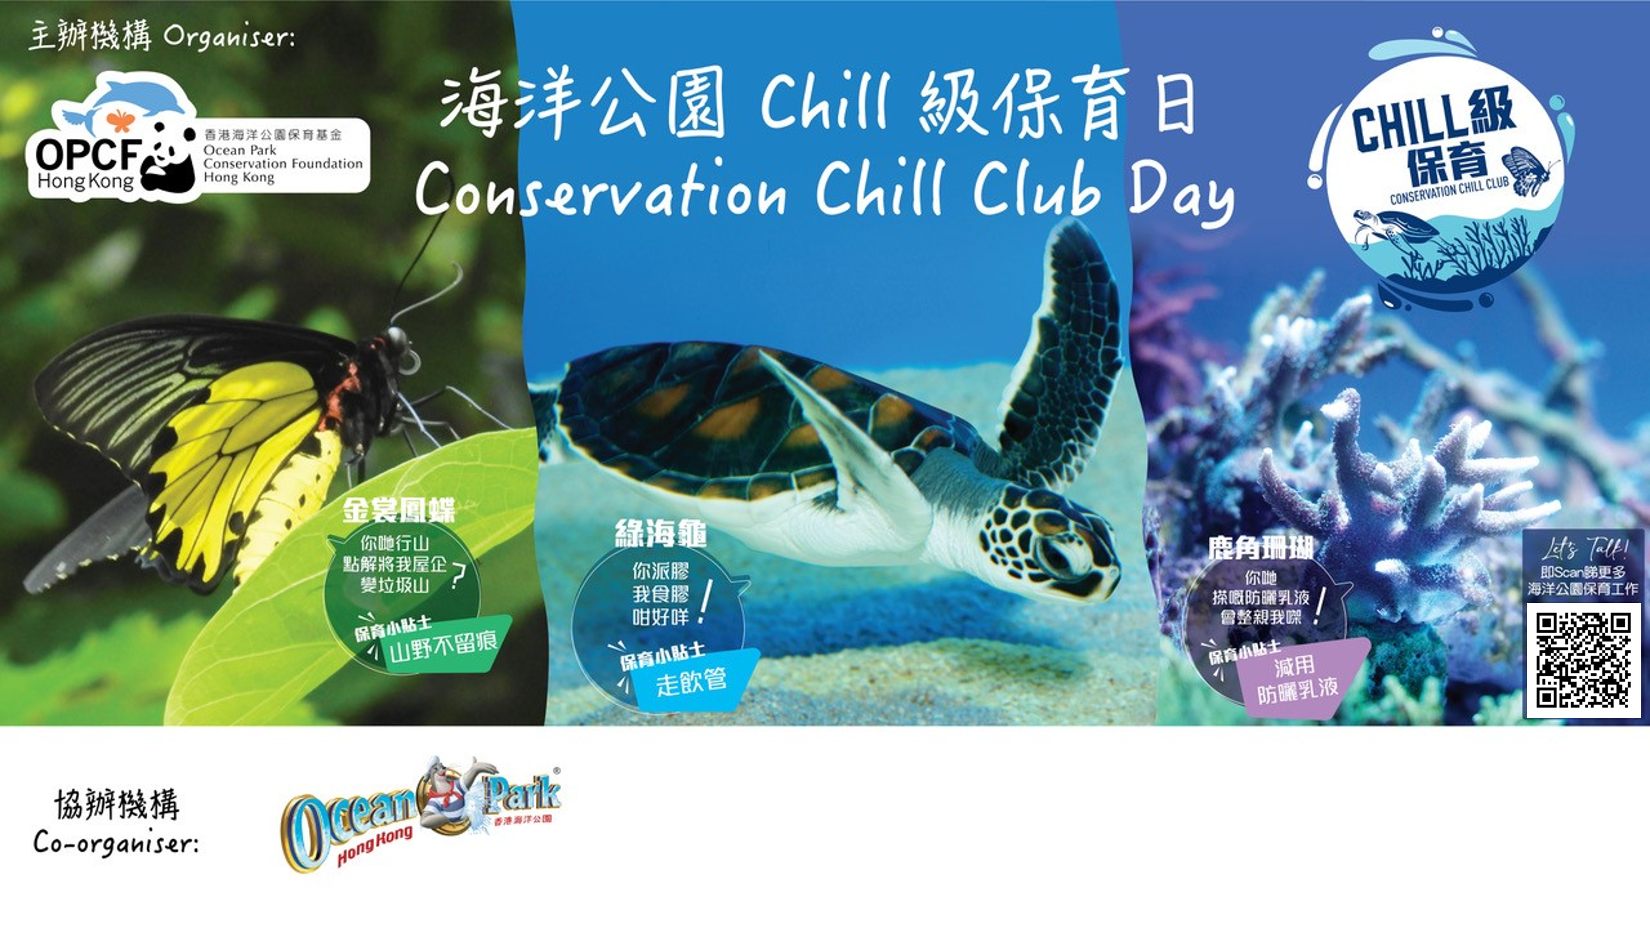 Ocean Park Conservation Chill Club Day 